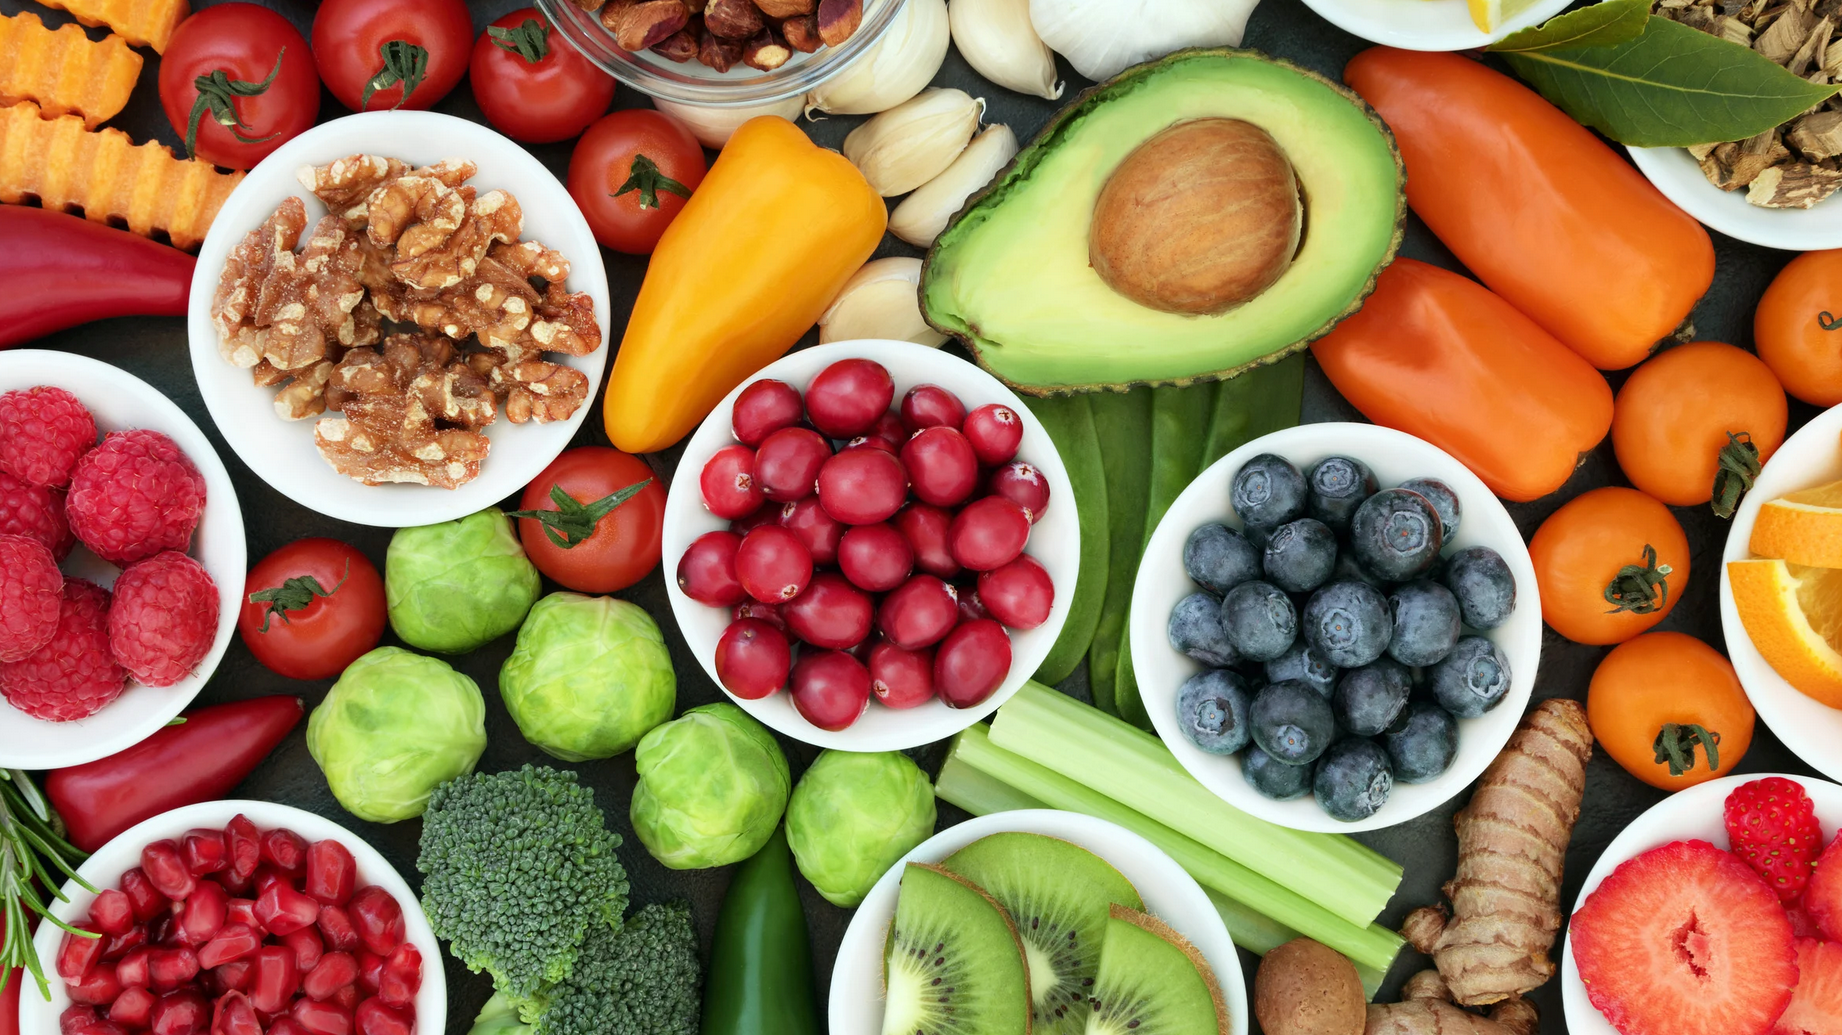 An array of healthy foods is displayed, including blueberries, tomatoes, walnuts, avocado, peppers, kiwi, pomegranate, turmeric, and more.